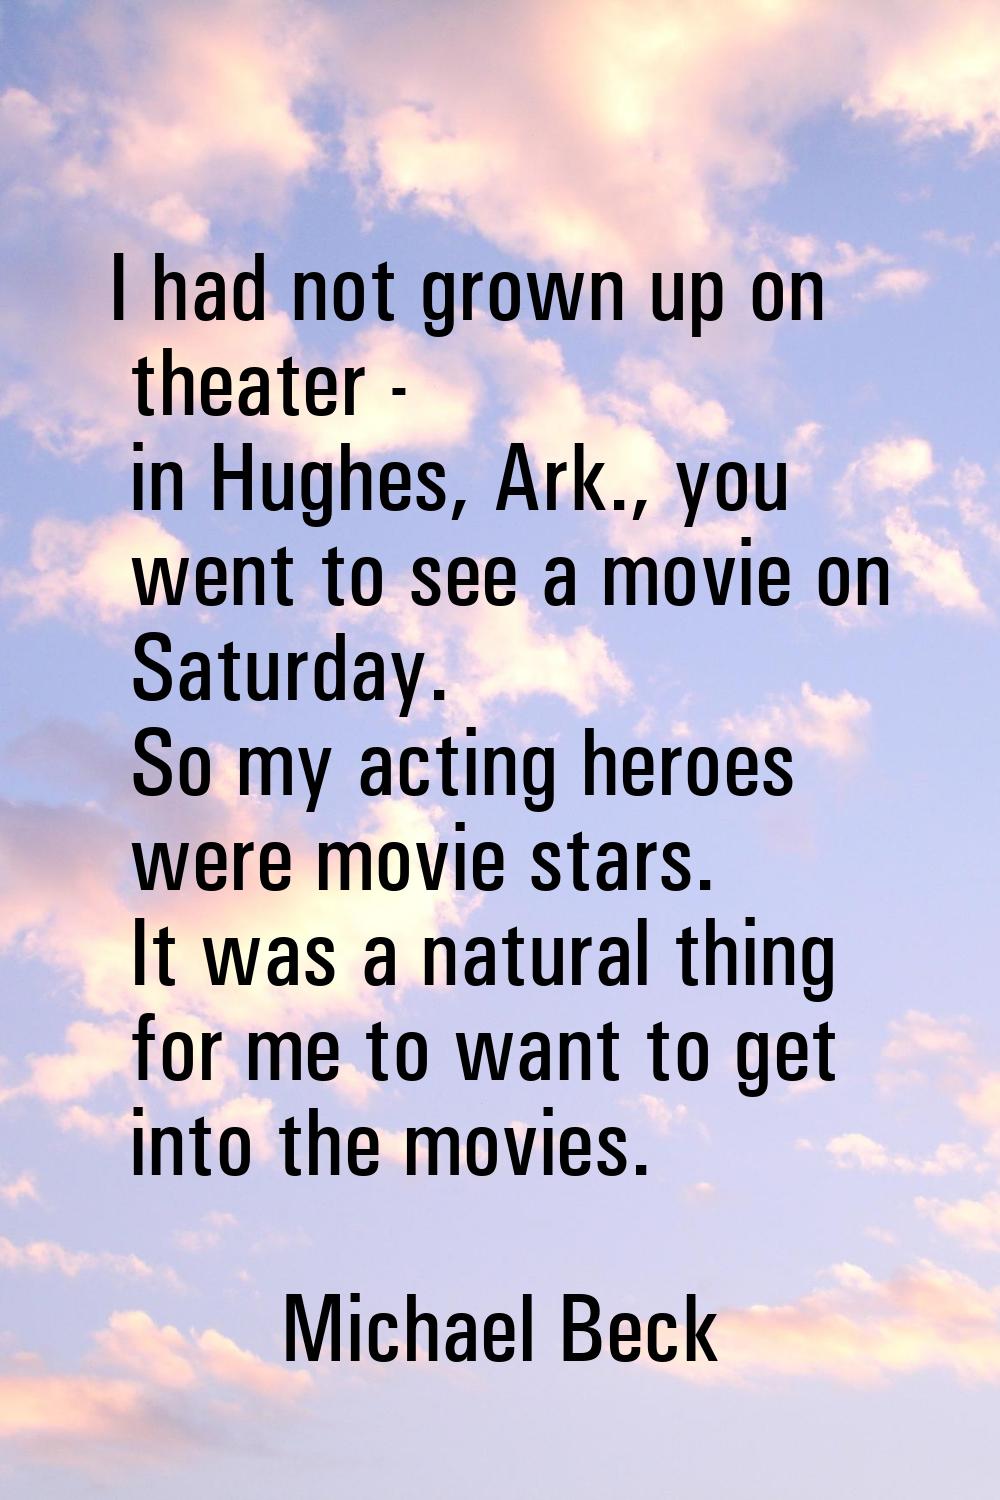 I had not grown up on theater - in Hughes, Ark., you went to see a movie on Saturday. So my acting 